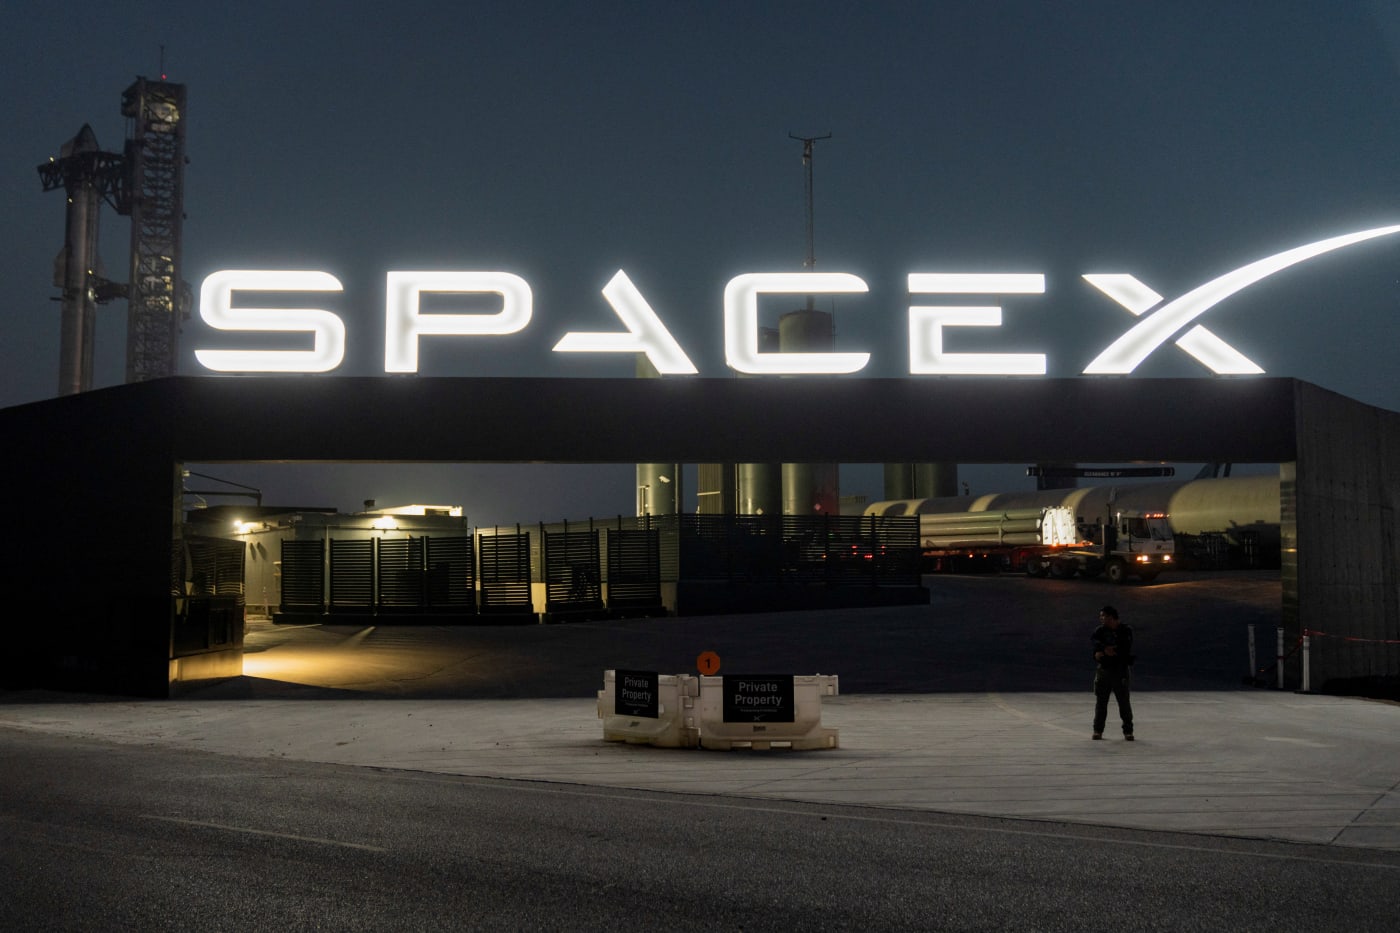 SpaceX is reportedly building hundreds of spy satellites for the US government